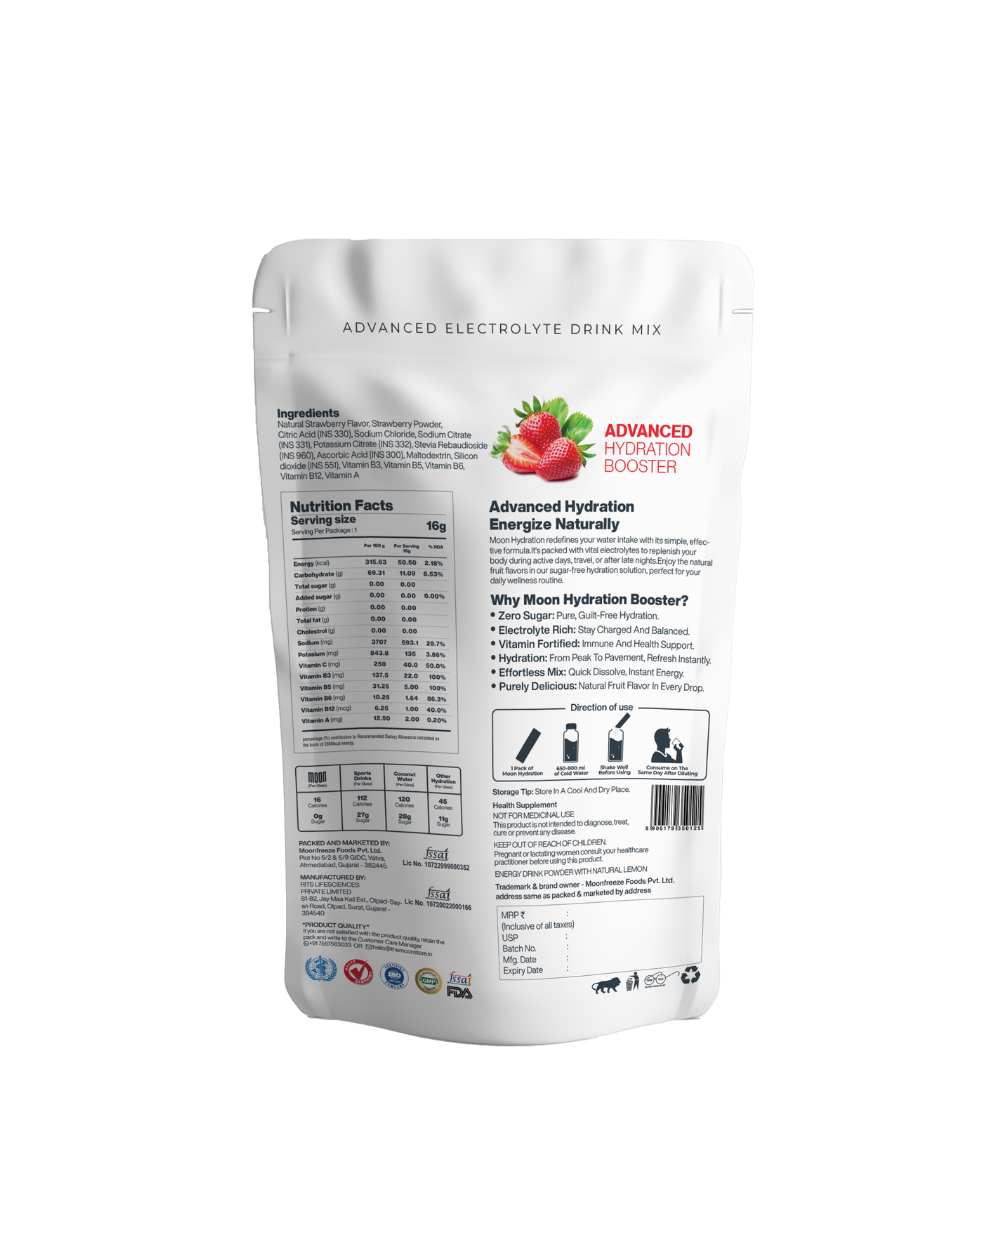 A standing pouch of Moon Lunar Strawberry + Lychee Hydration Booster advanced electrolyte drink mix with a nutritional facts label and product information, designed as a hydration booster for those wellness-focused.